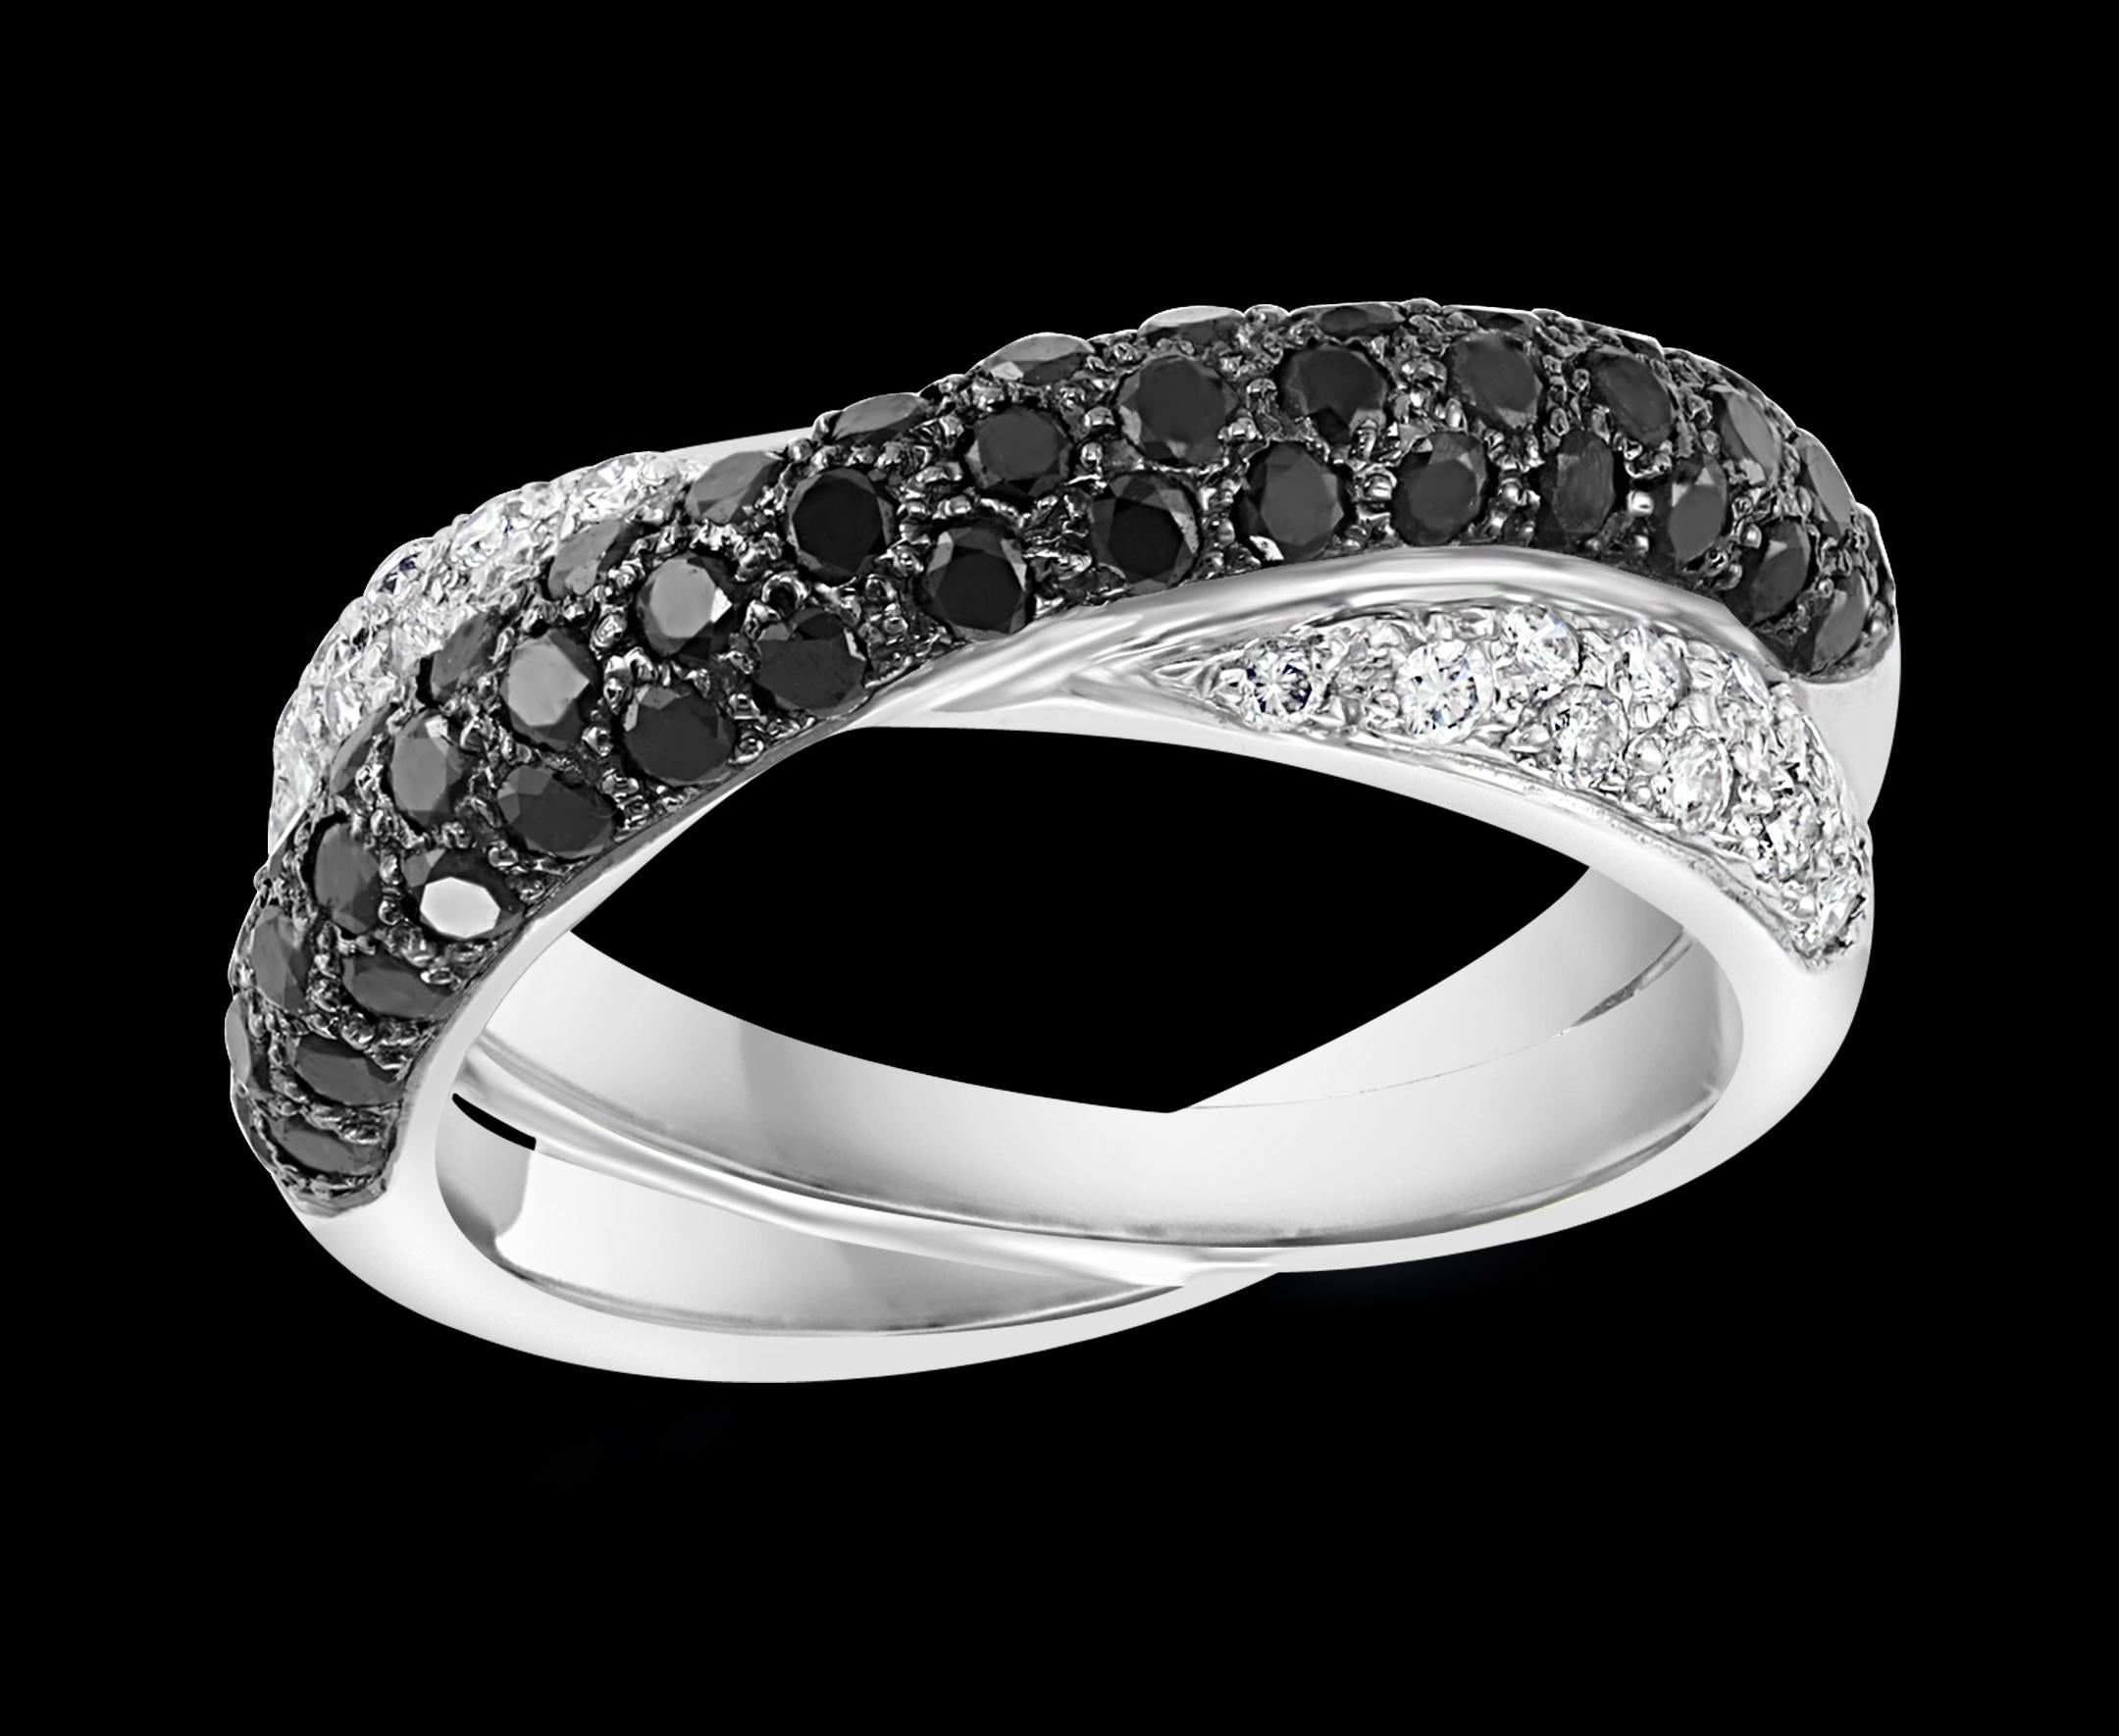 0.8 Ct Black & 0.7 Ct White  Diamond  Cross Over Band 18 Karat White Gold 
Diamond weights are approximate.
Diamond VS quality and G/H color
Very clean and shiny diamonds.
This Half eternity band features one row of white diamonds and one row of